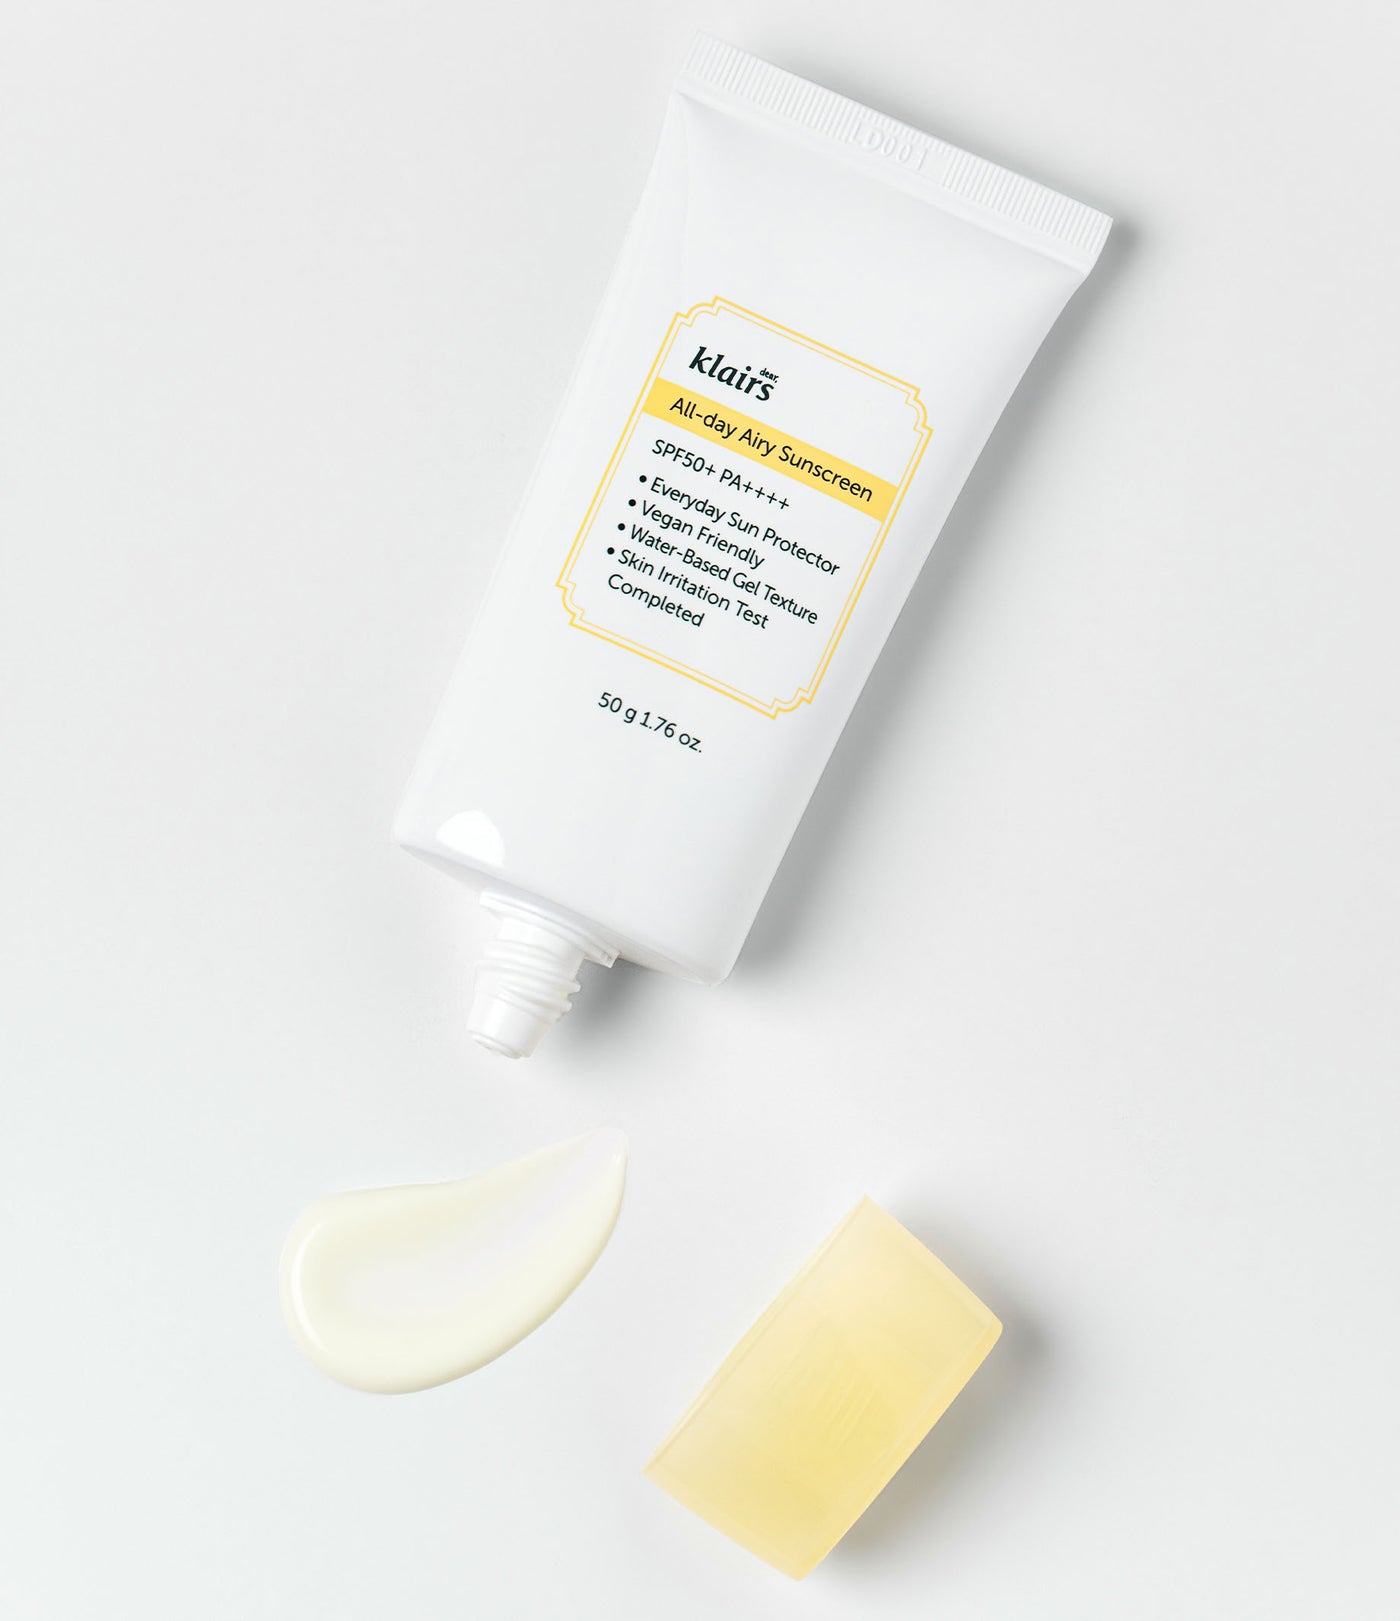 Klairs All-day Airy Sunscreen SPF50+ PA++++